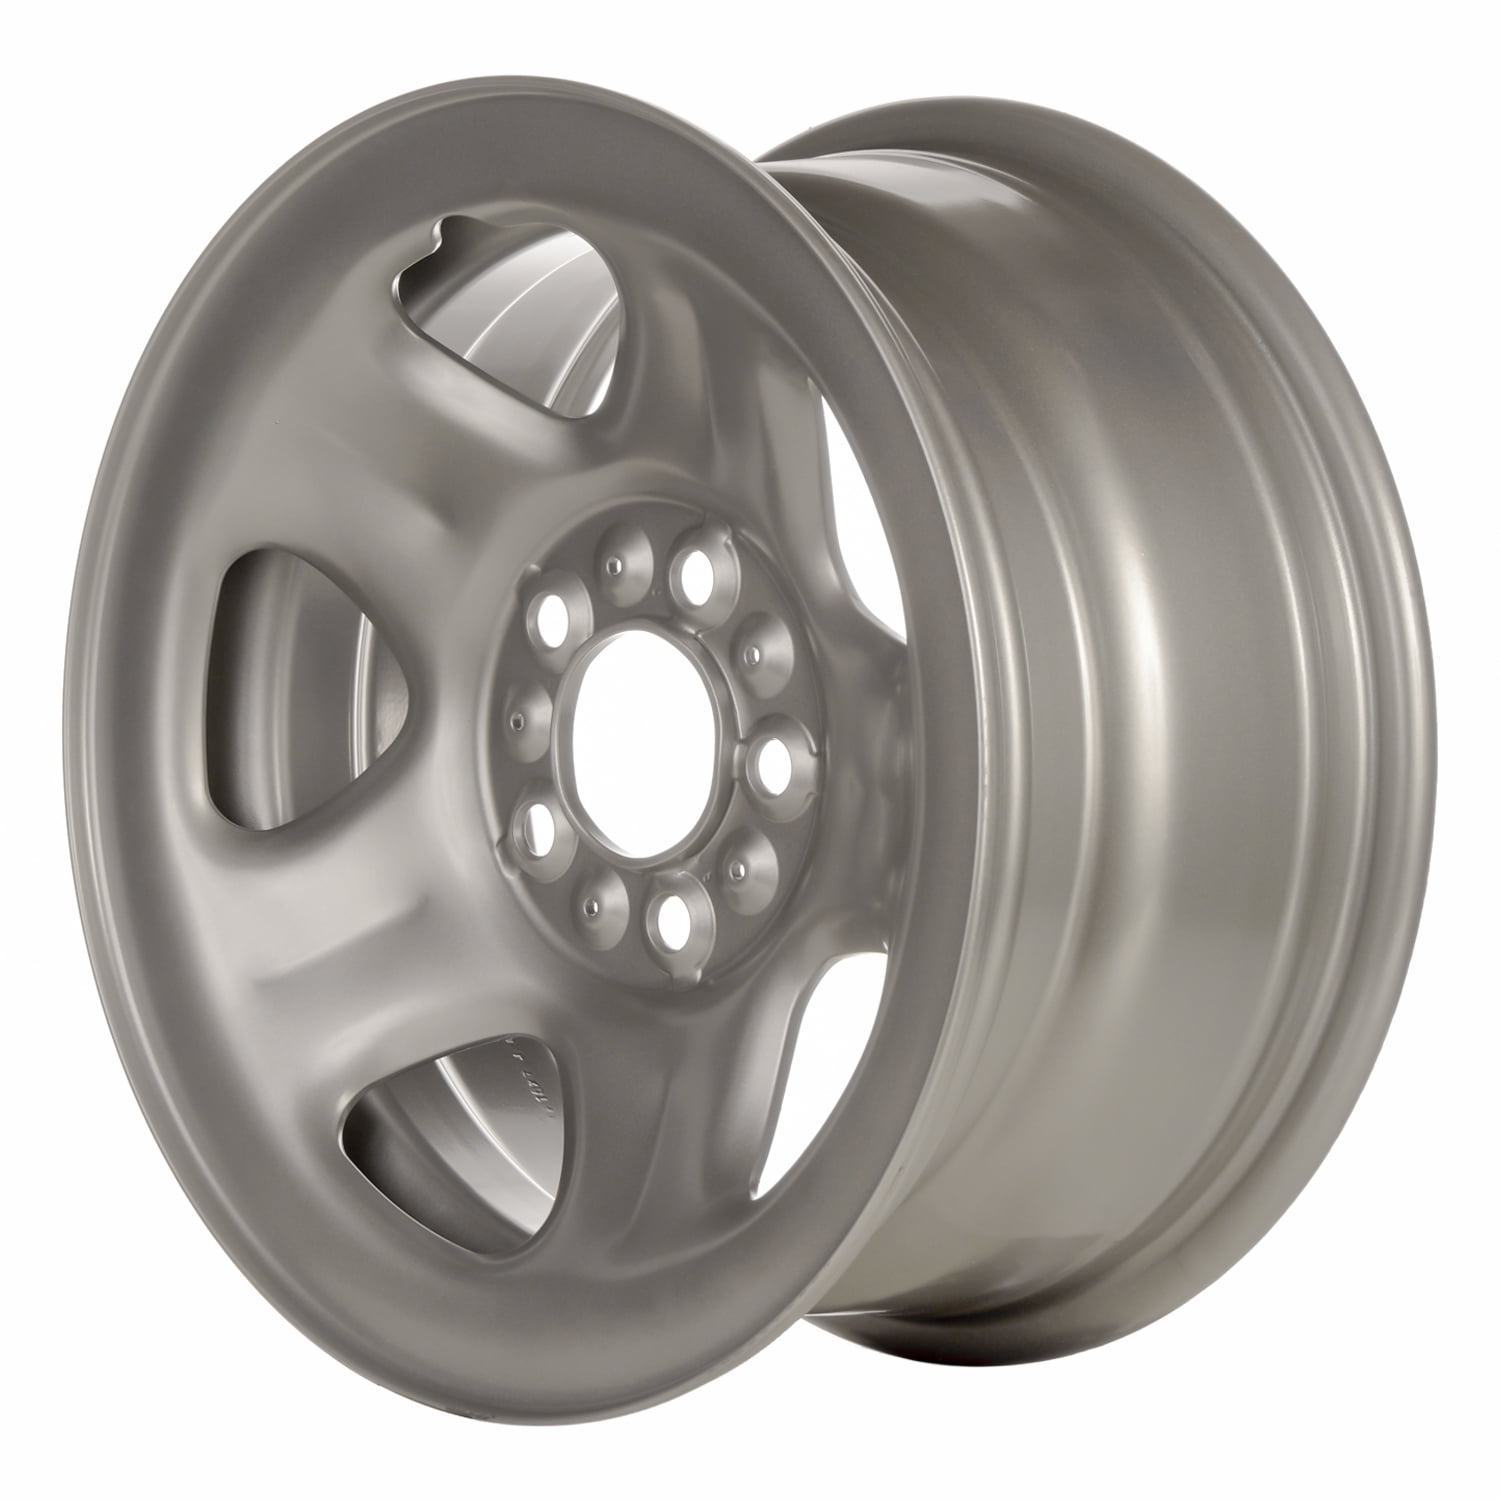 15 X 7 Reconditioned OEM Steel Wheel, Silver, Fits 2003-2007 Jeep Wrangler  